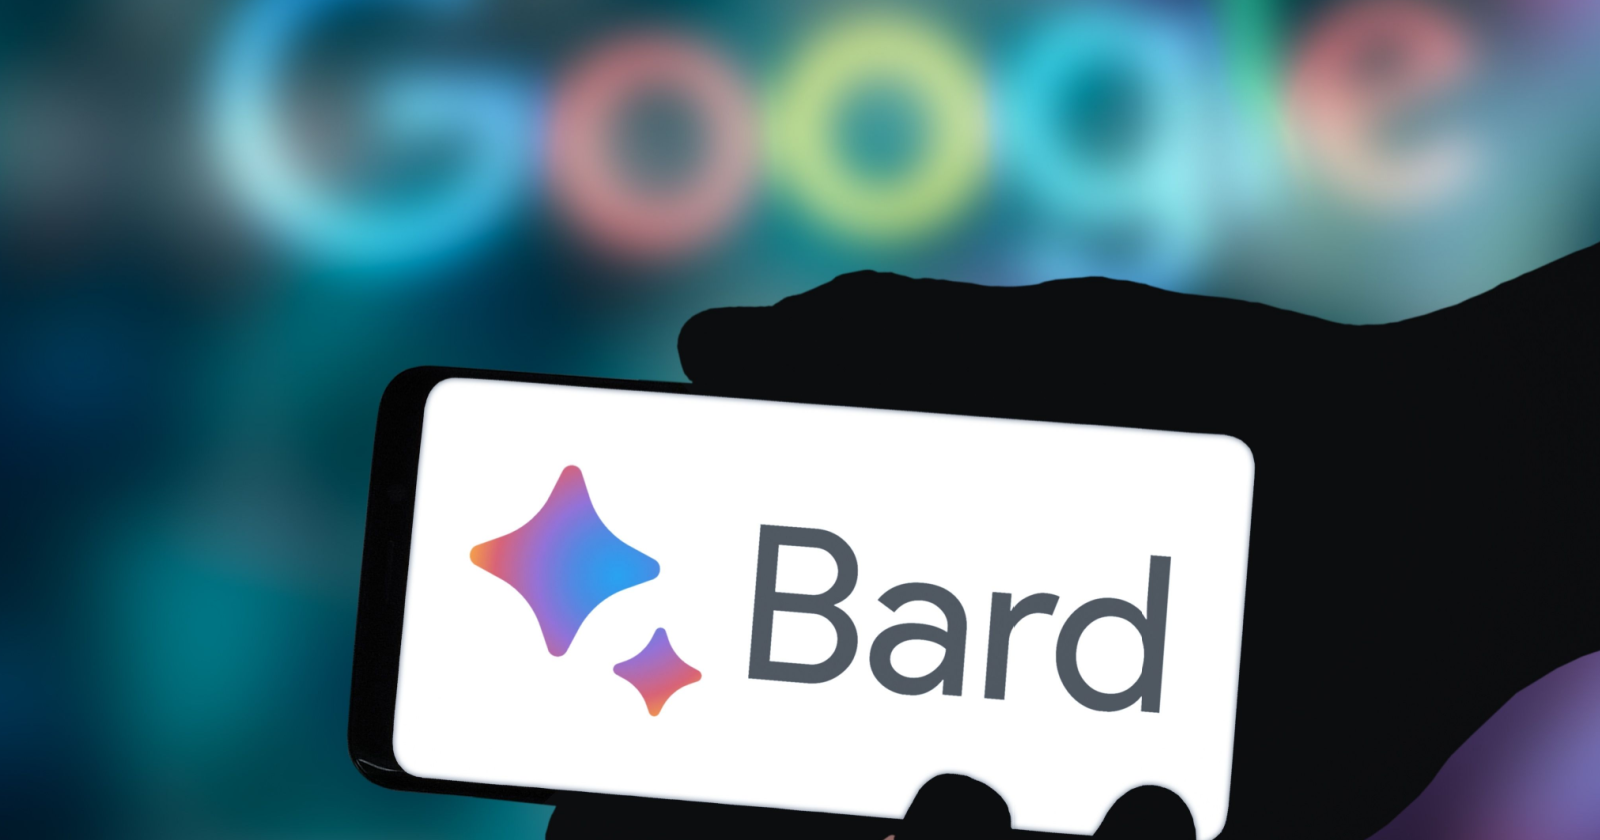 Google Bard removes the waiting list and adds image and encoding features